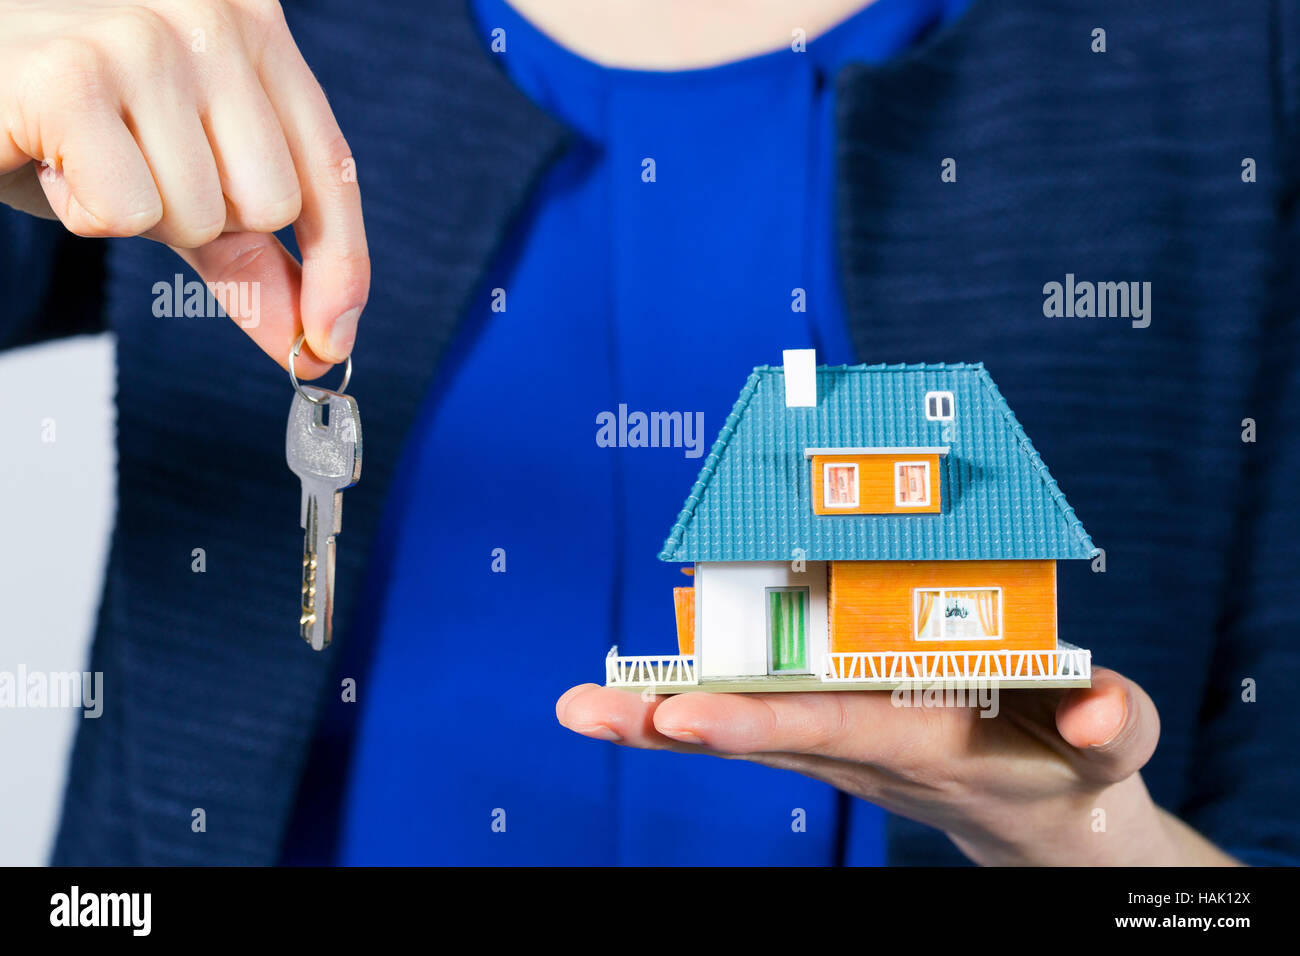 real estate agent with key and house model on hand Stock Photo